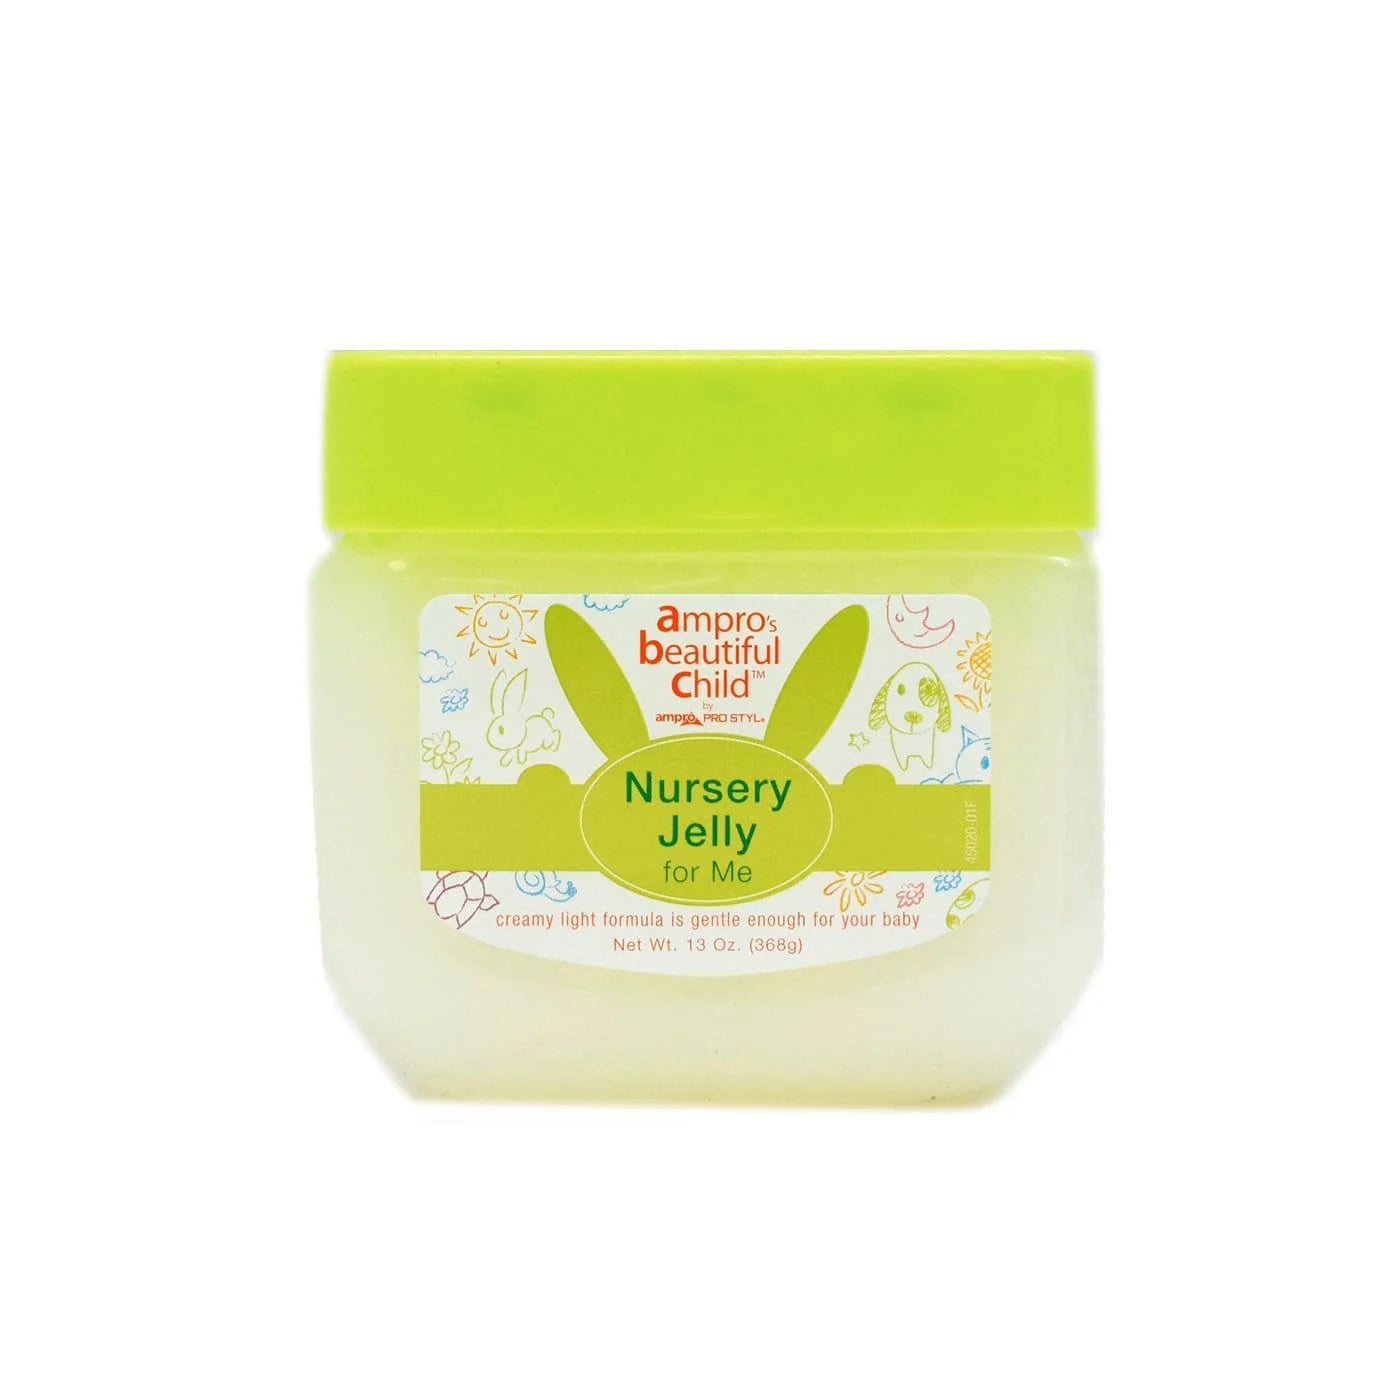 AMPRO'S BEAUTIFUL CHILD NURSERY JELLY FOR ME 13OZ